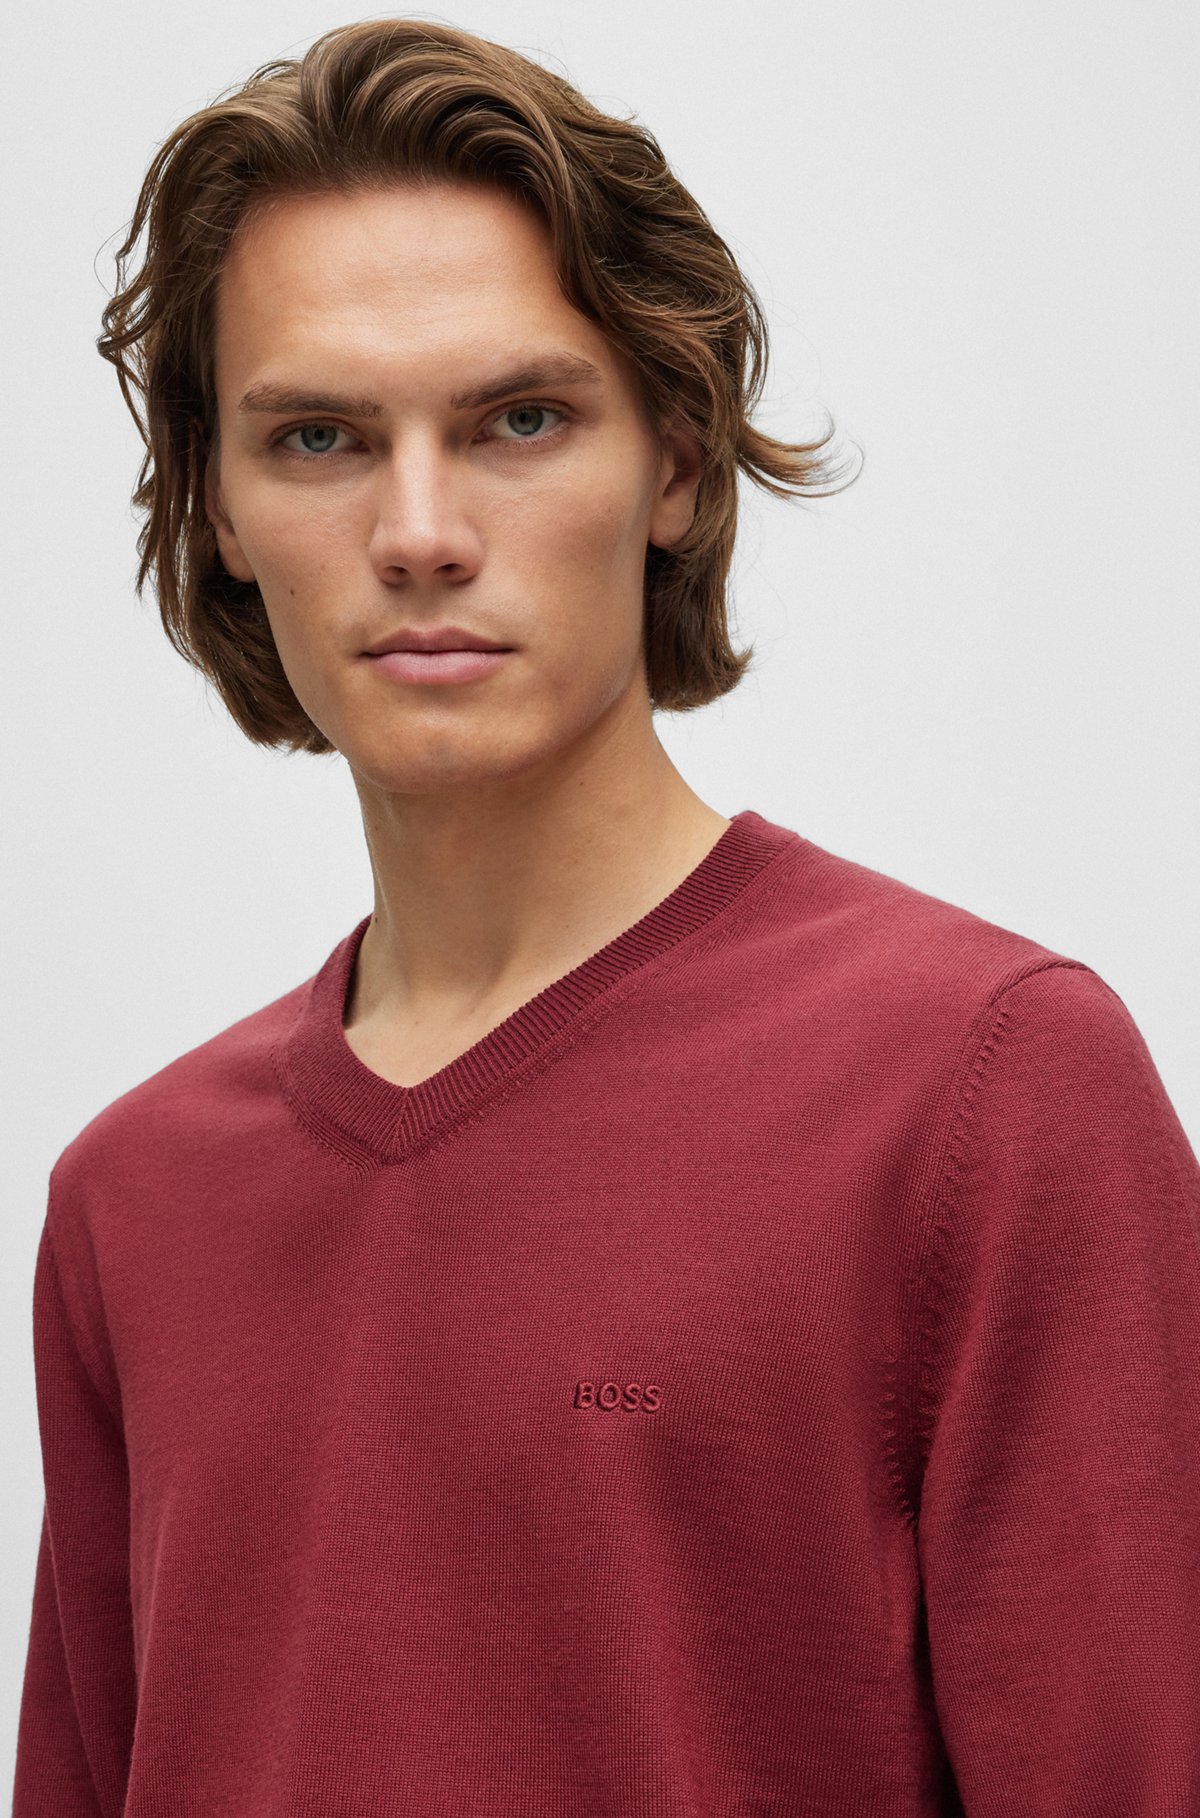  V-neck sweater in responsible wool, Dark Red